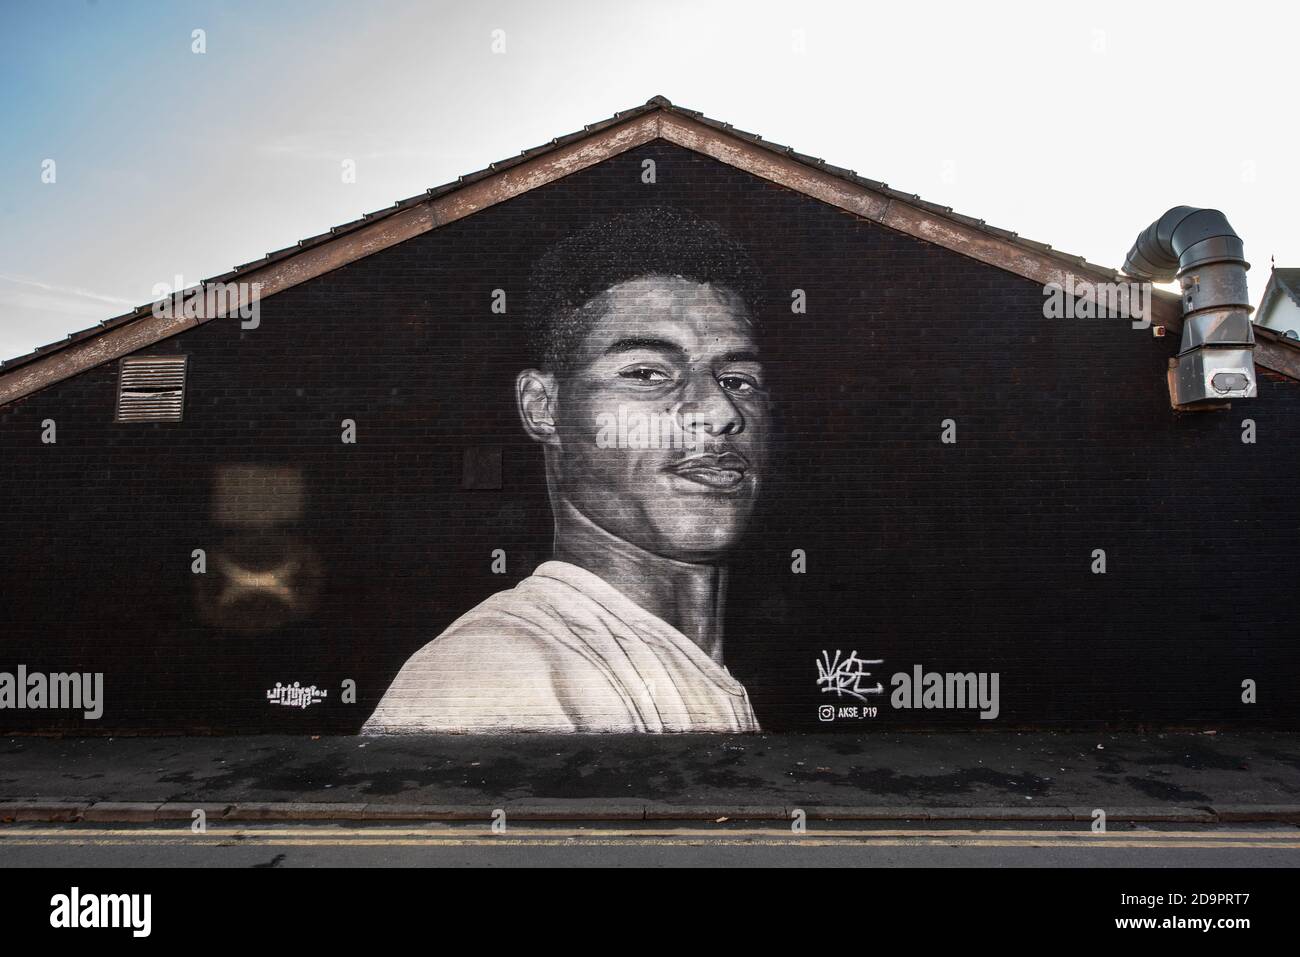 Marcus Rashford mural by Akse p19. Withington, Manchester. The mural was commissioned after Rashford campaigned for free meals for school children. Stock Photo